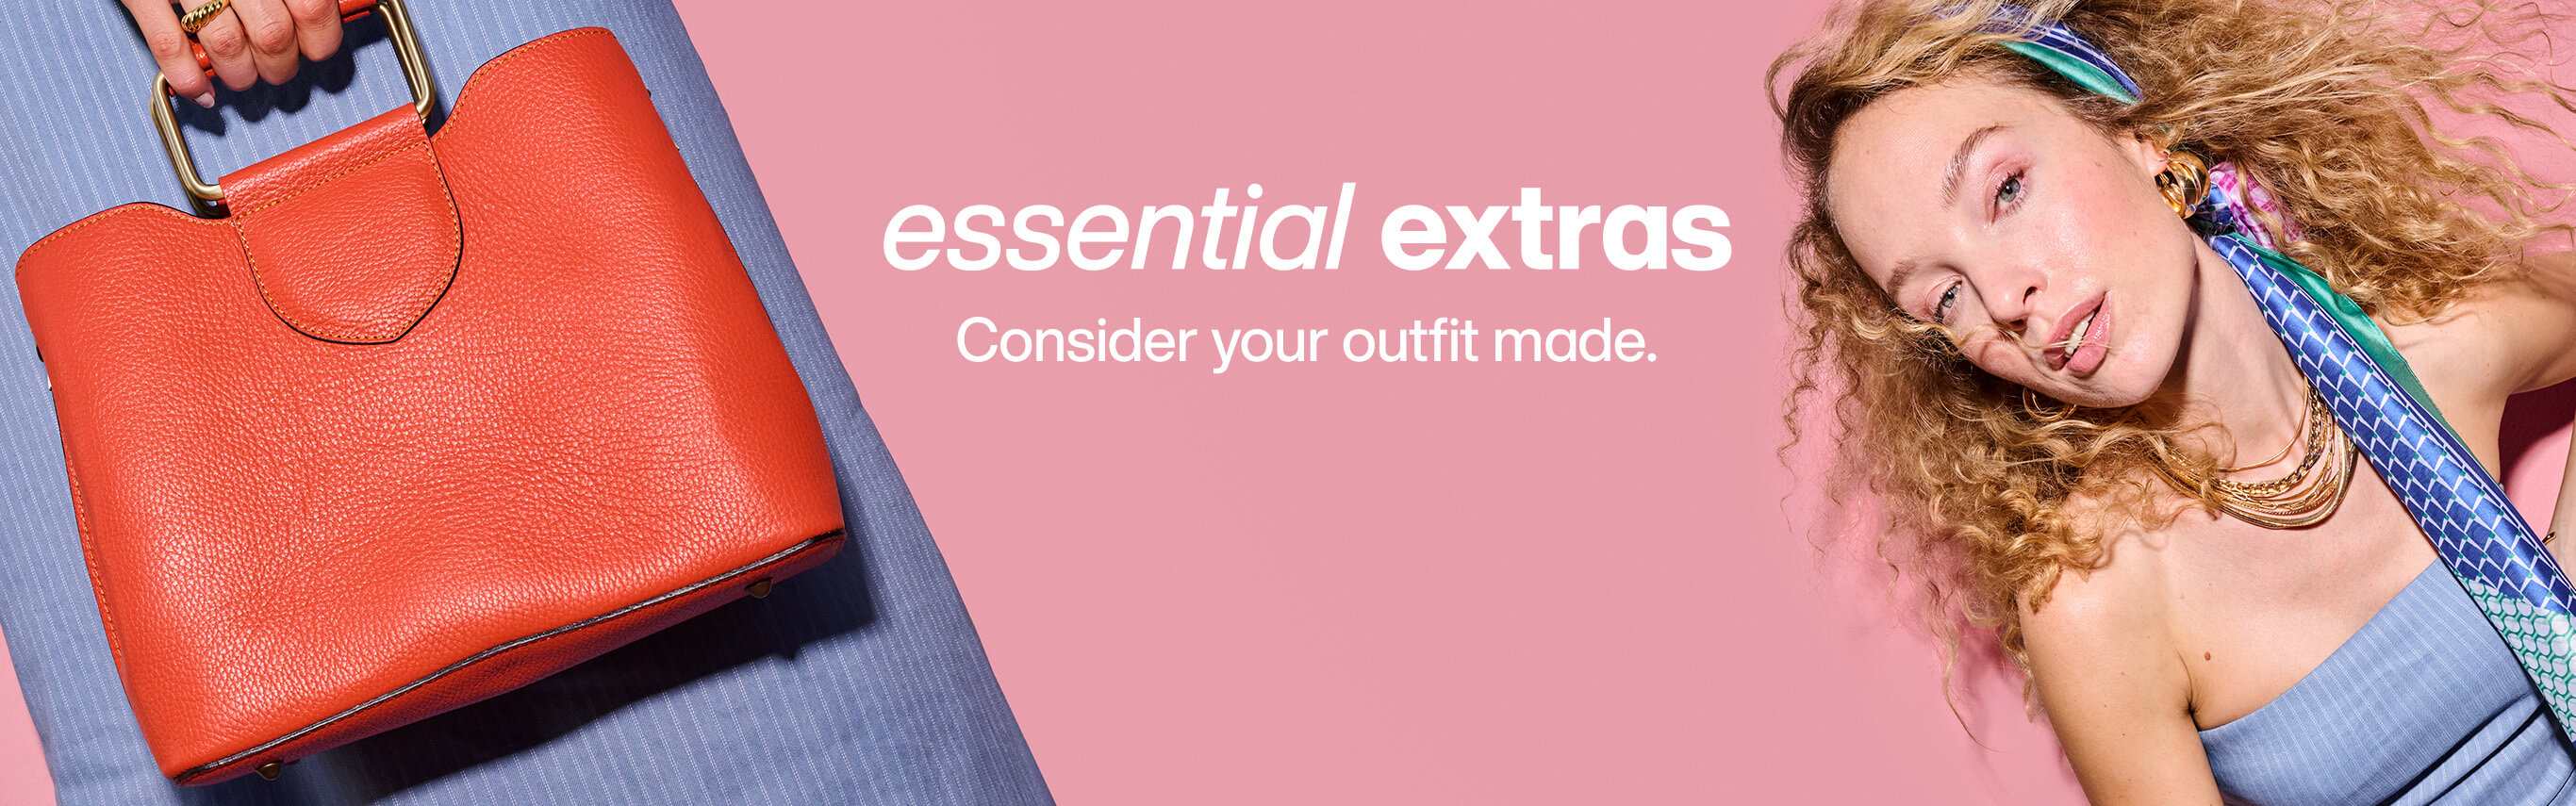 essential extras - Consider your outfit made.